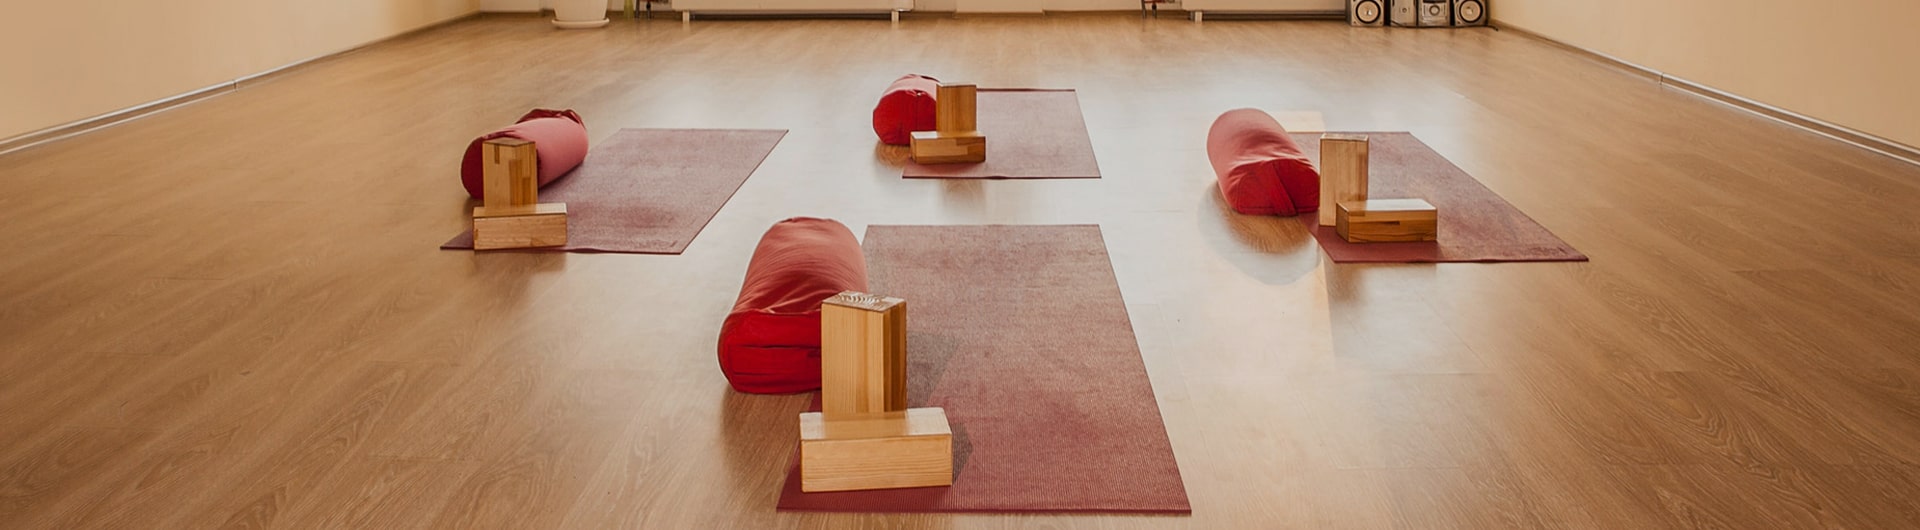 An exercise studio set up for yoga and Pilates classes.